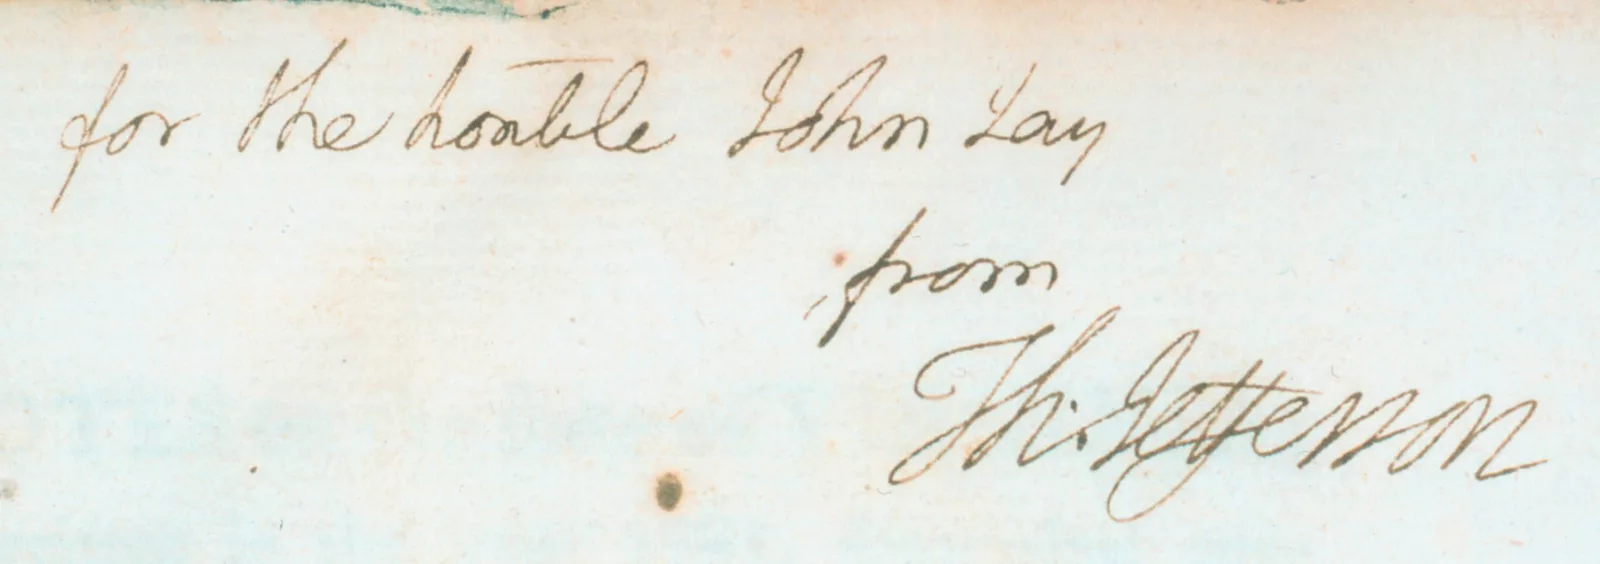 Inscription to John Jay by Thomas Jefferson, in a copy of Notes on the State of Virginia